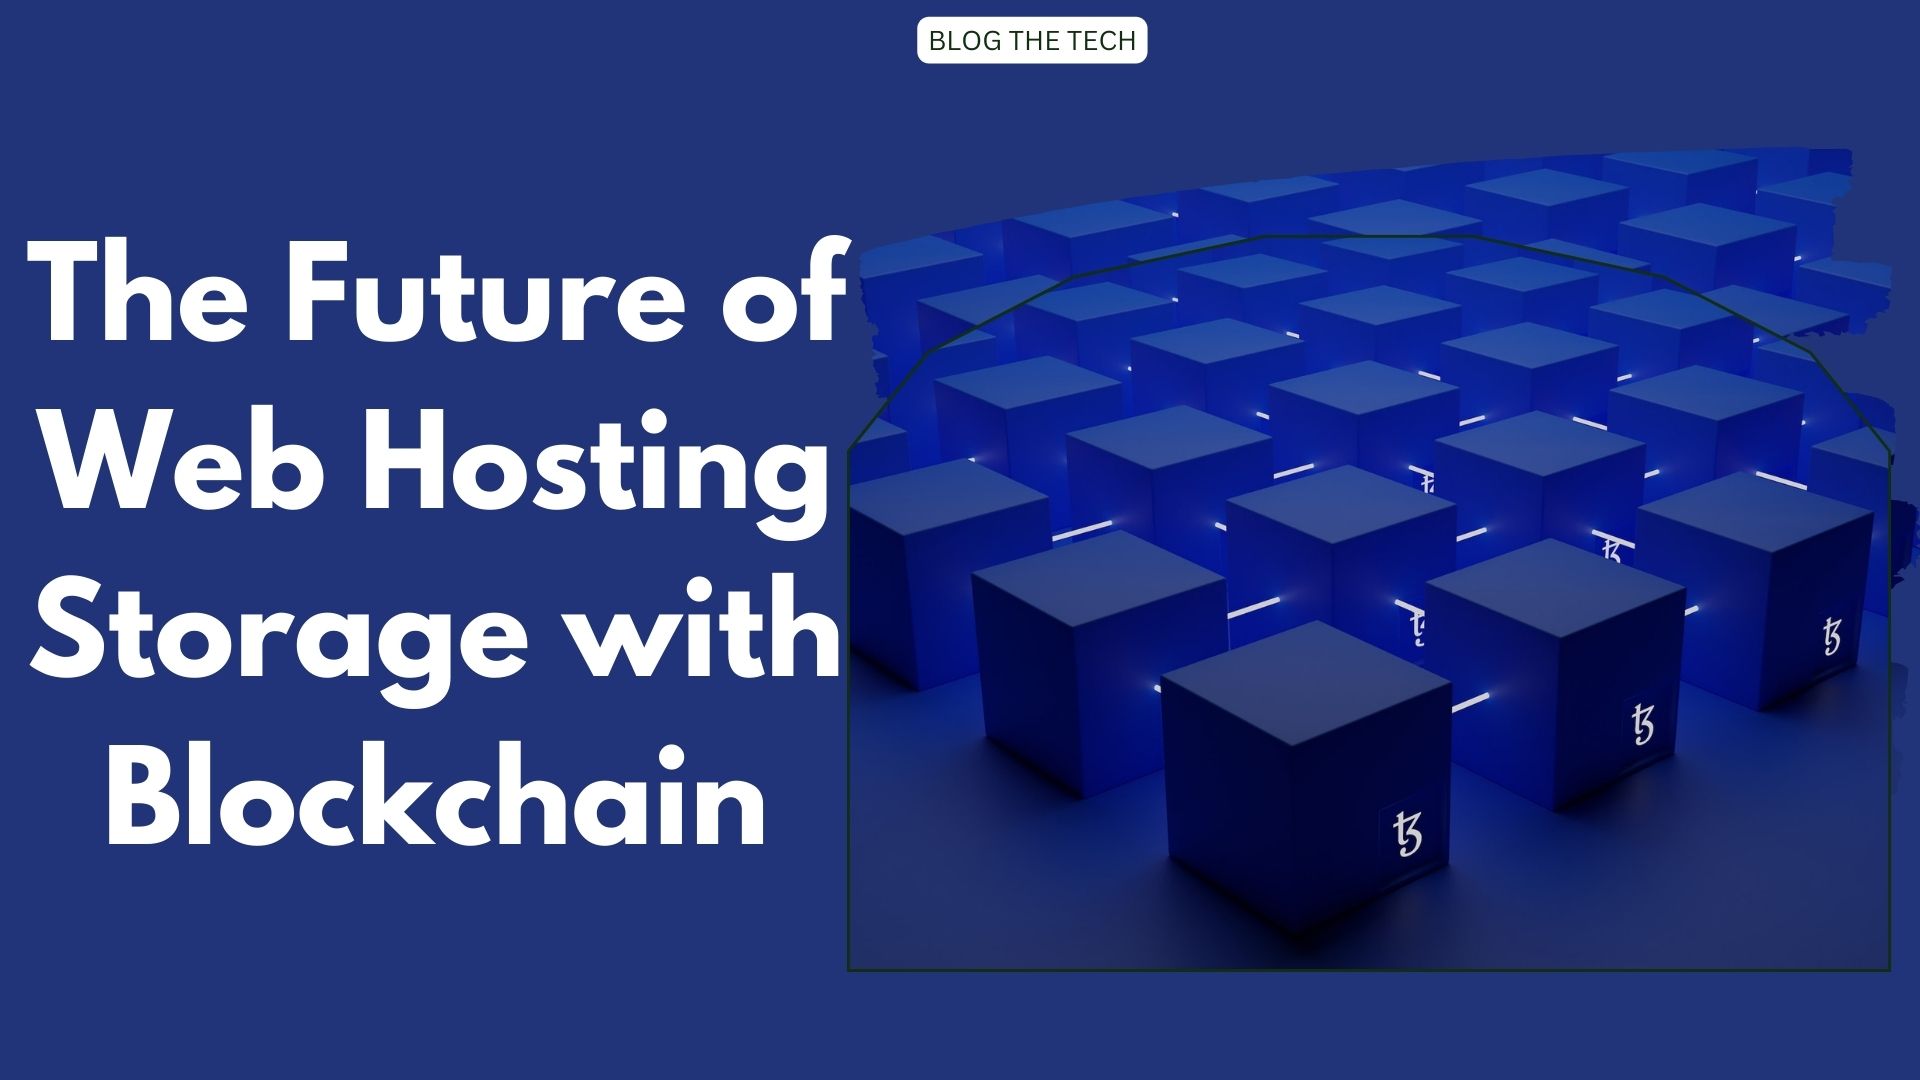 The Future of Web Hosting Storage with Blockchain